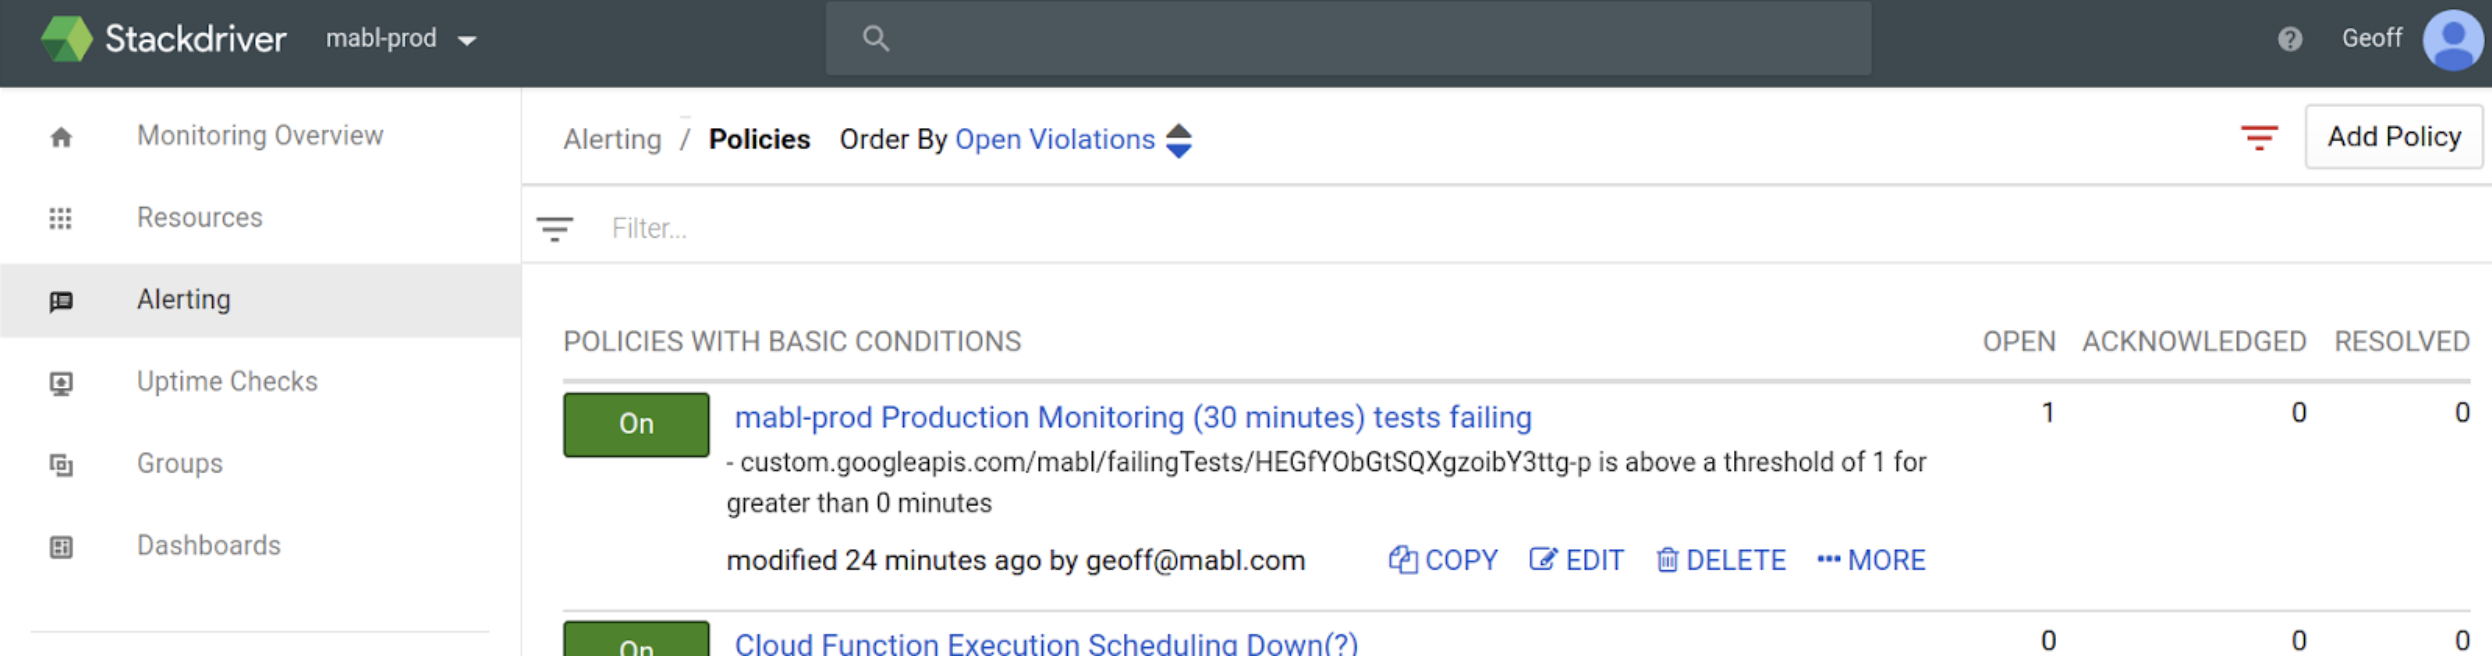 A screenshot showing how to define an alerting policy for the production monitoring plan in Stackdriver.